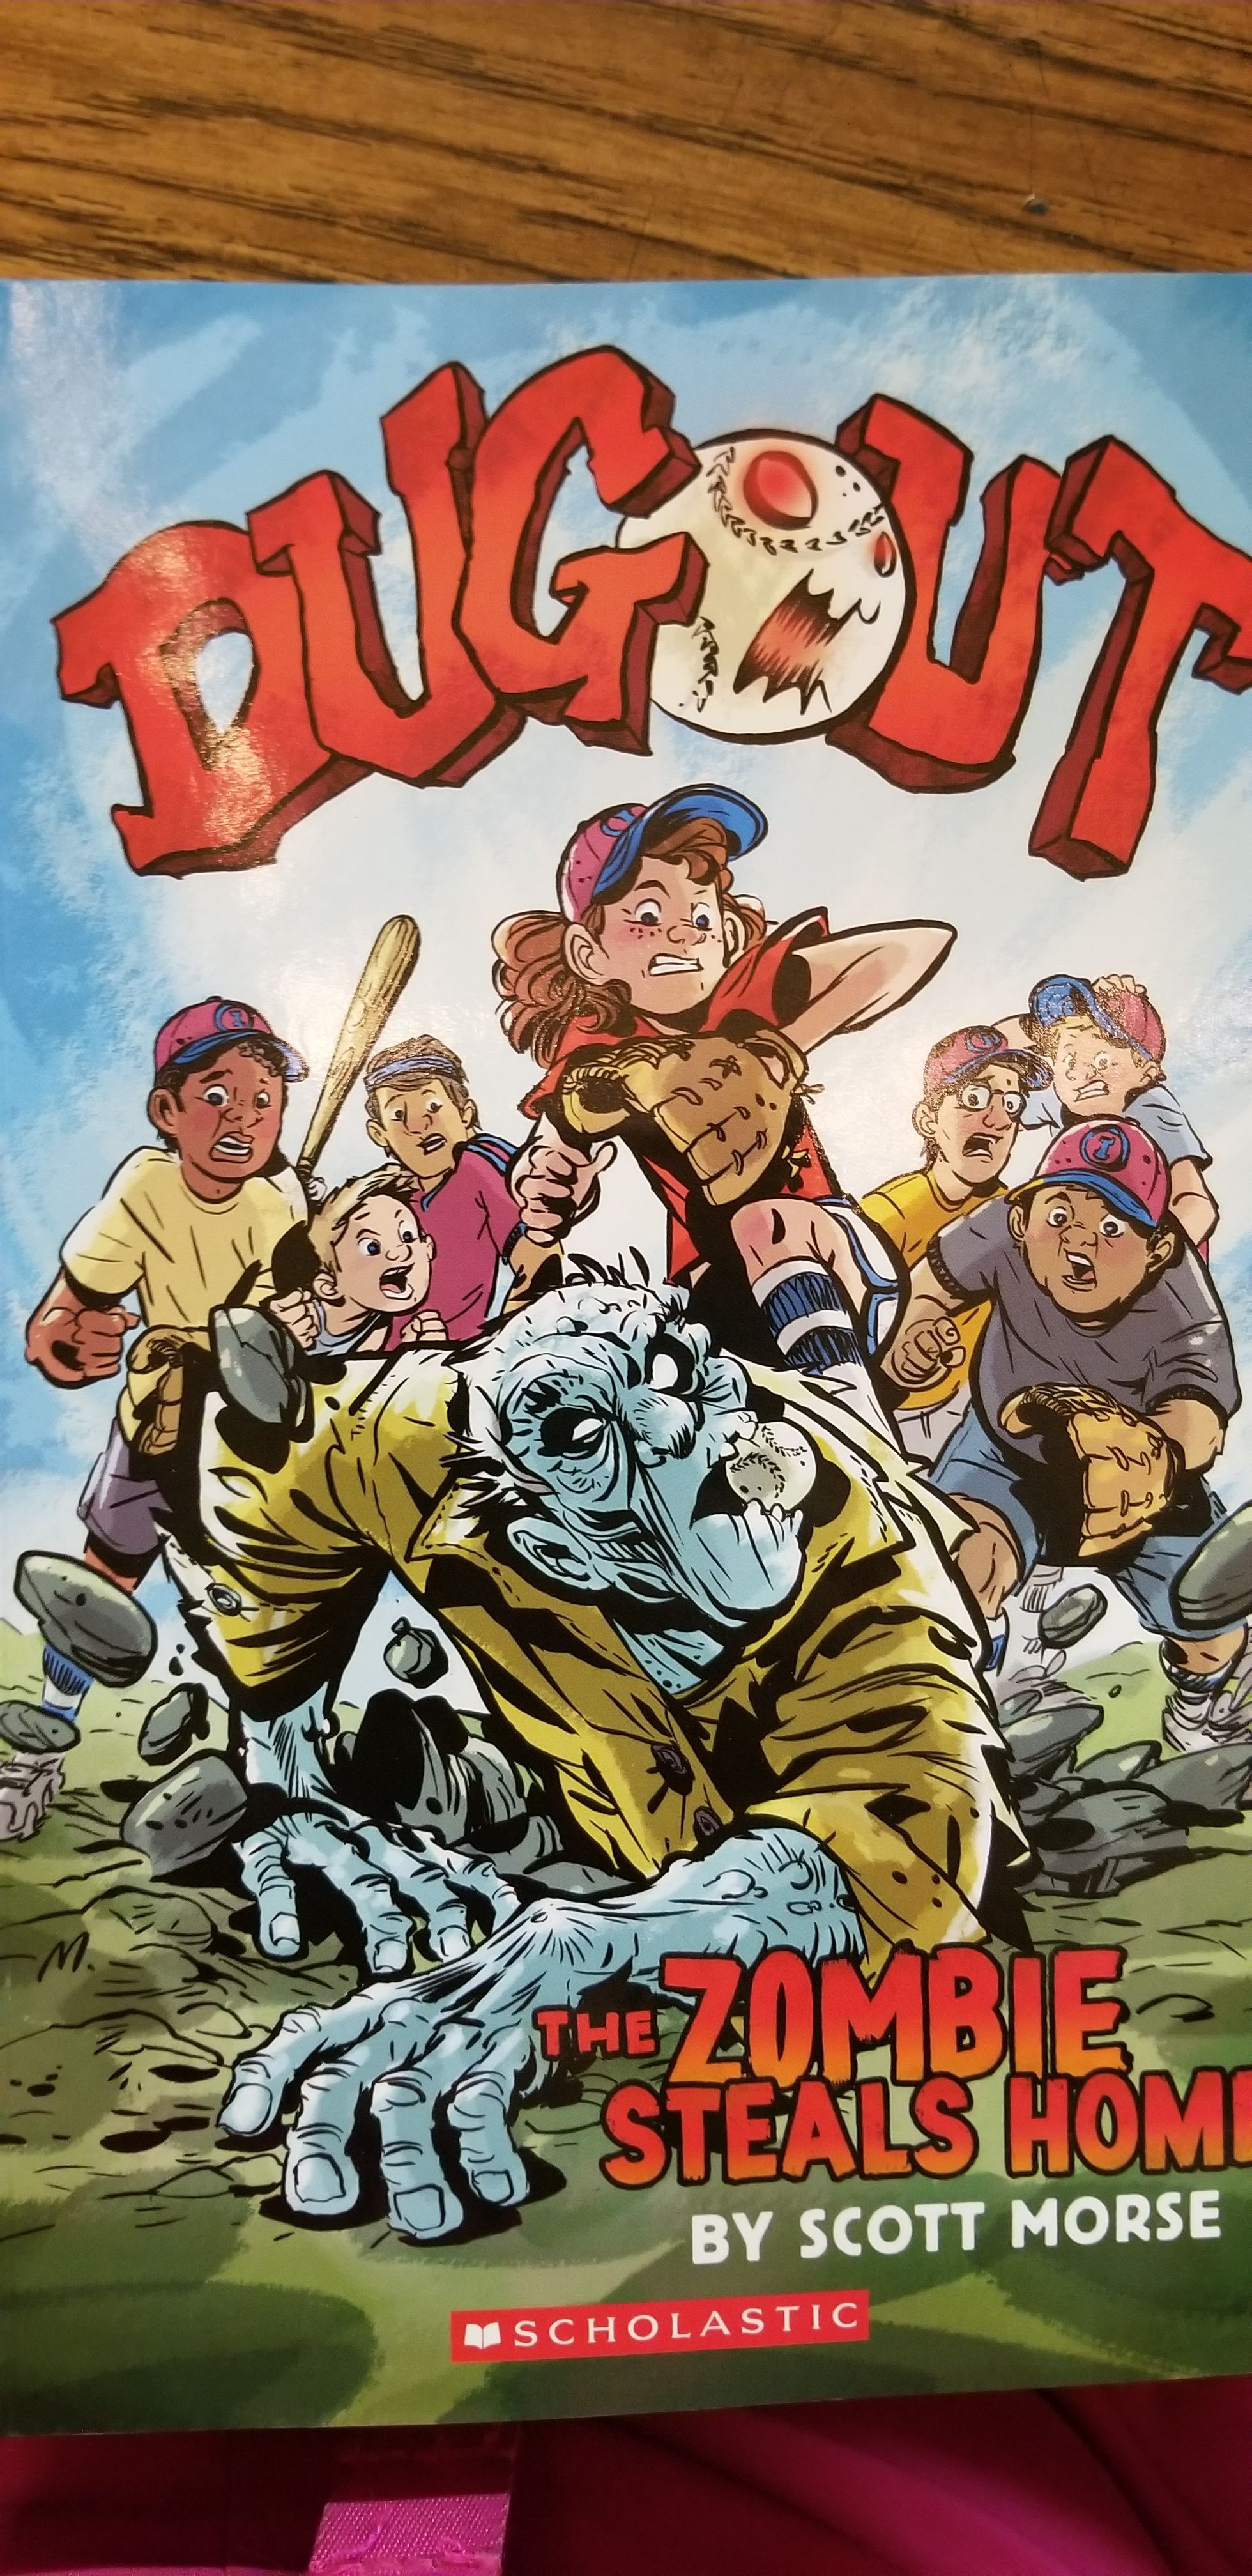 Dugout: The Zombie Steals Home - Scott Morse book collectible [Barcode 9781338188097] - Main Image 1